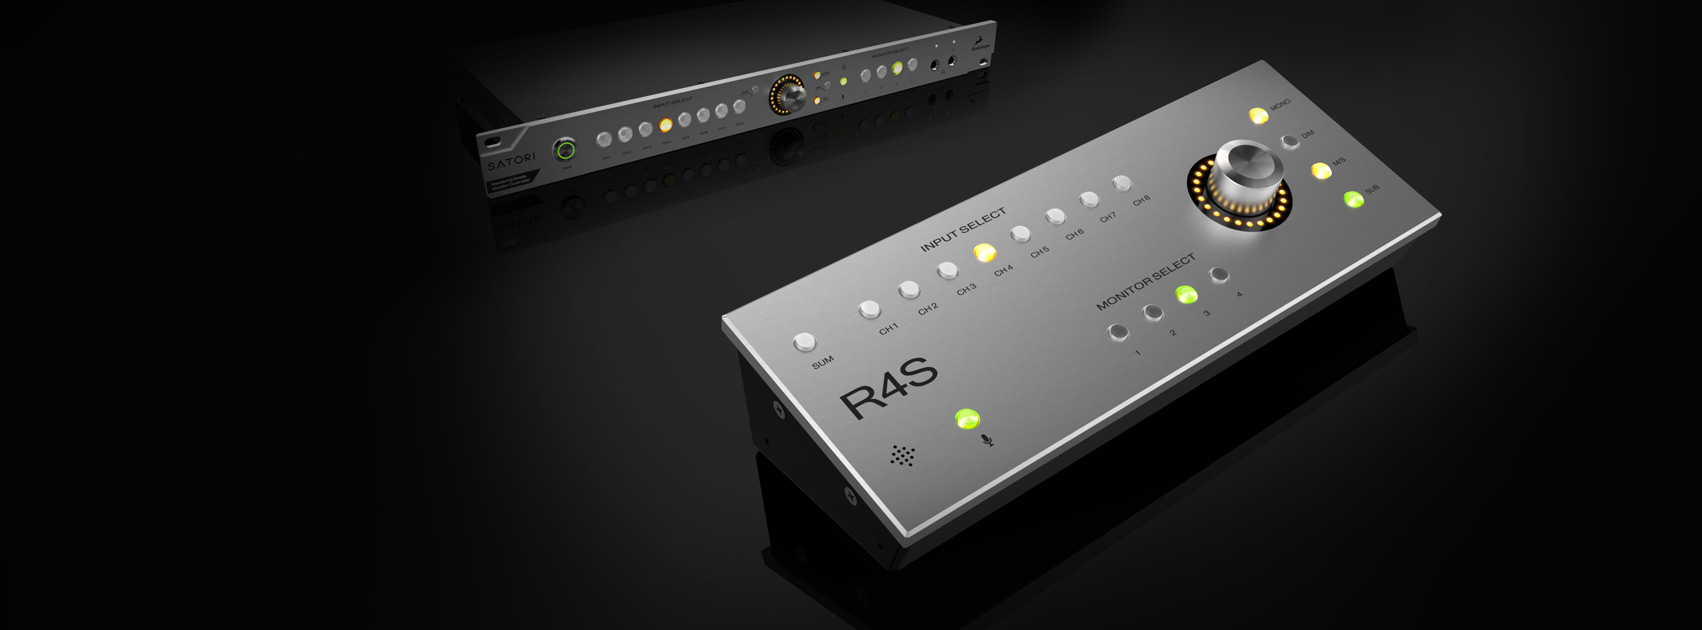 Antelope Audio Launches R4S Remote Control for Satori at Summer NAMM, Delivering Flexible Source and Monitor Switching in the Studio